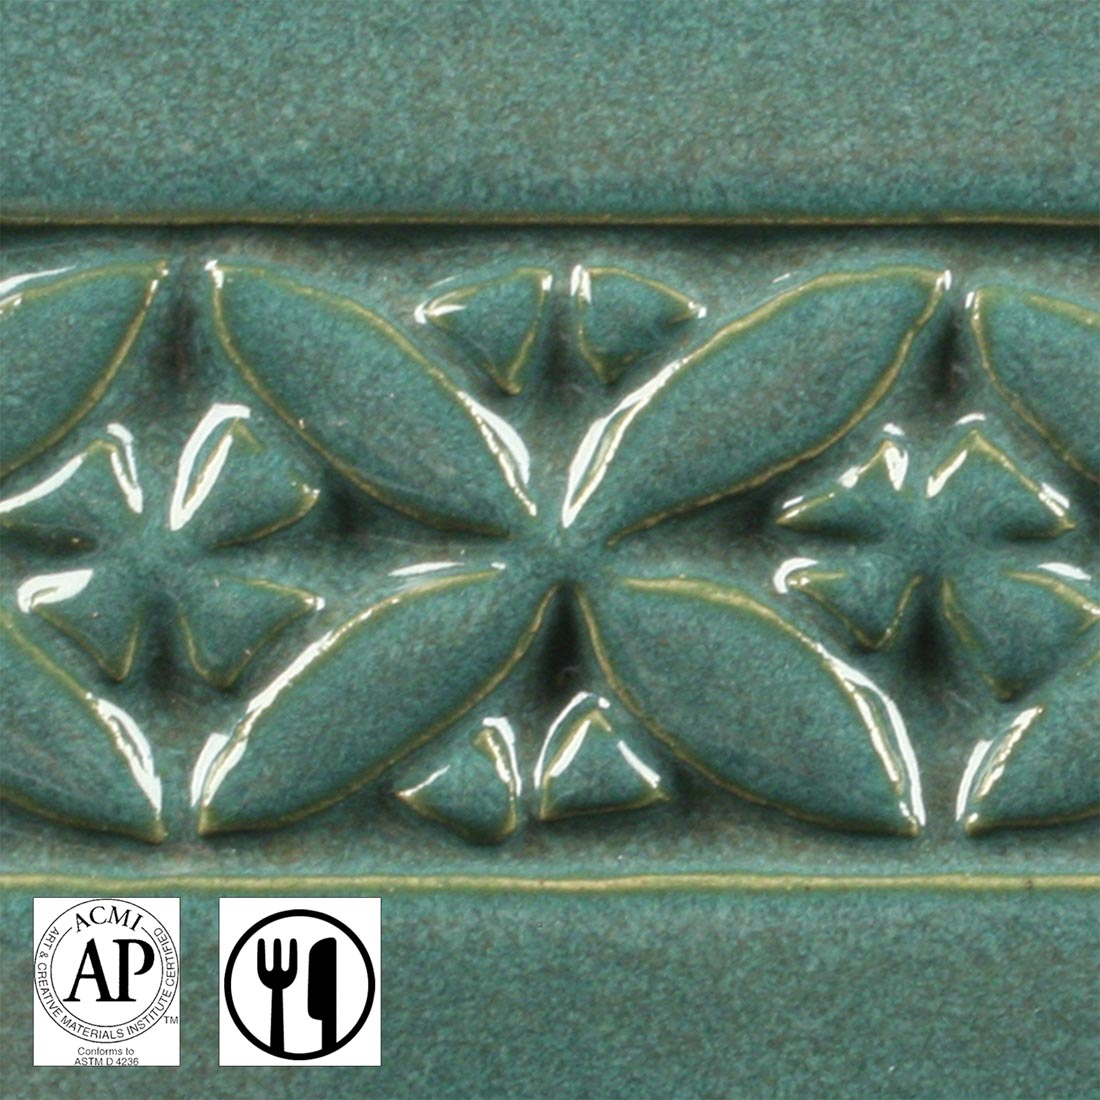 clay tile with Tourmaline AMACO Potter's Choice High Fire Glaze applied; symbols for AP Seal and food safe